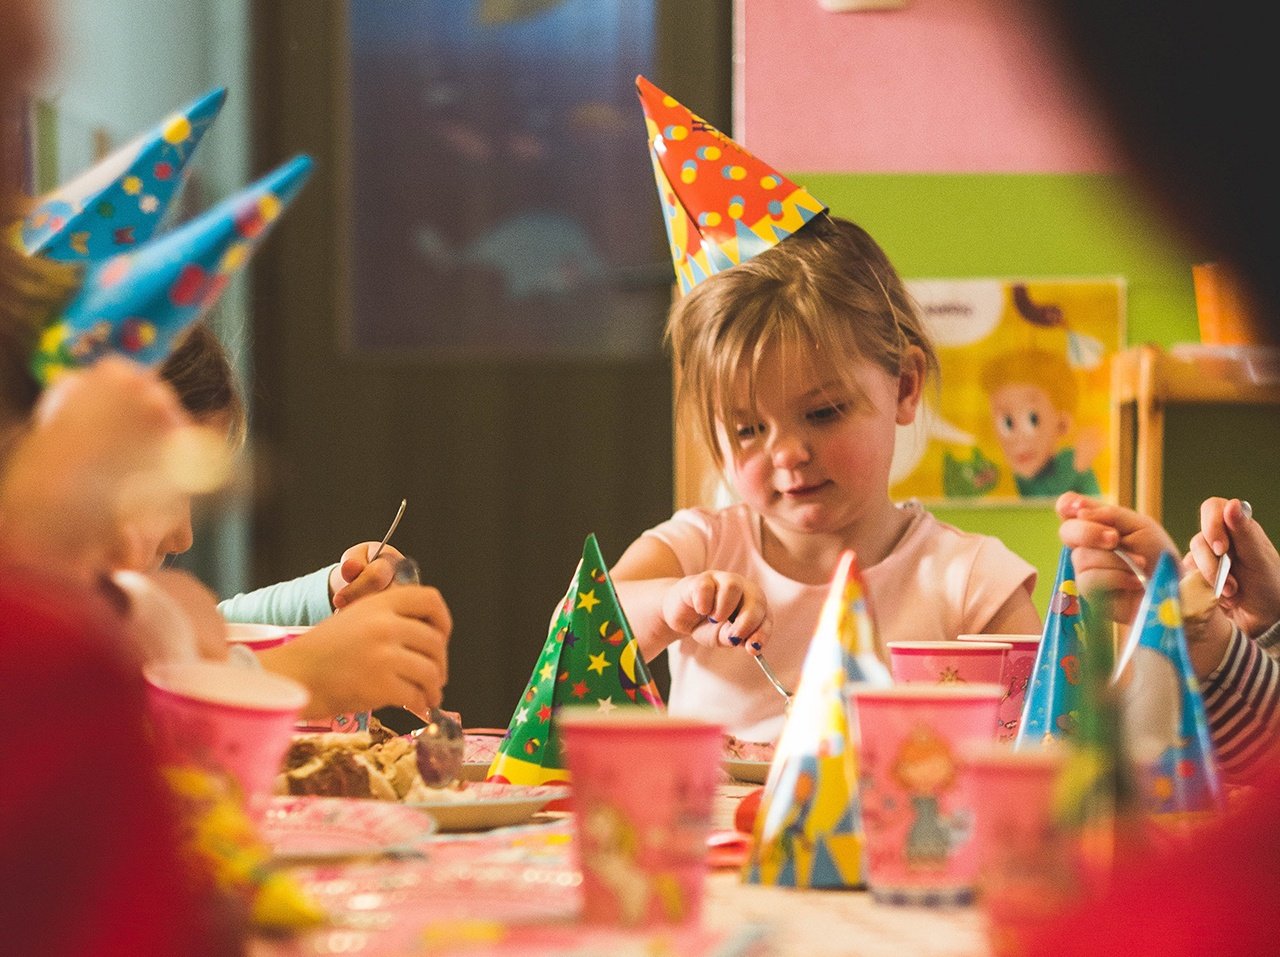 It's Party Time: Celebrating Birthdays in the Classroom